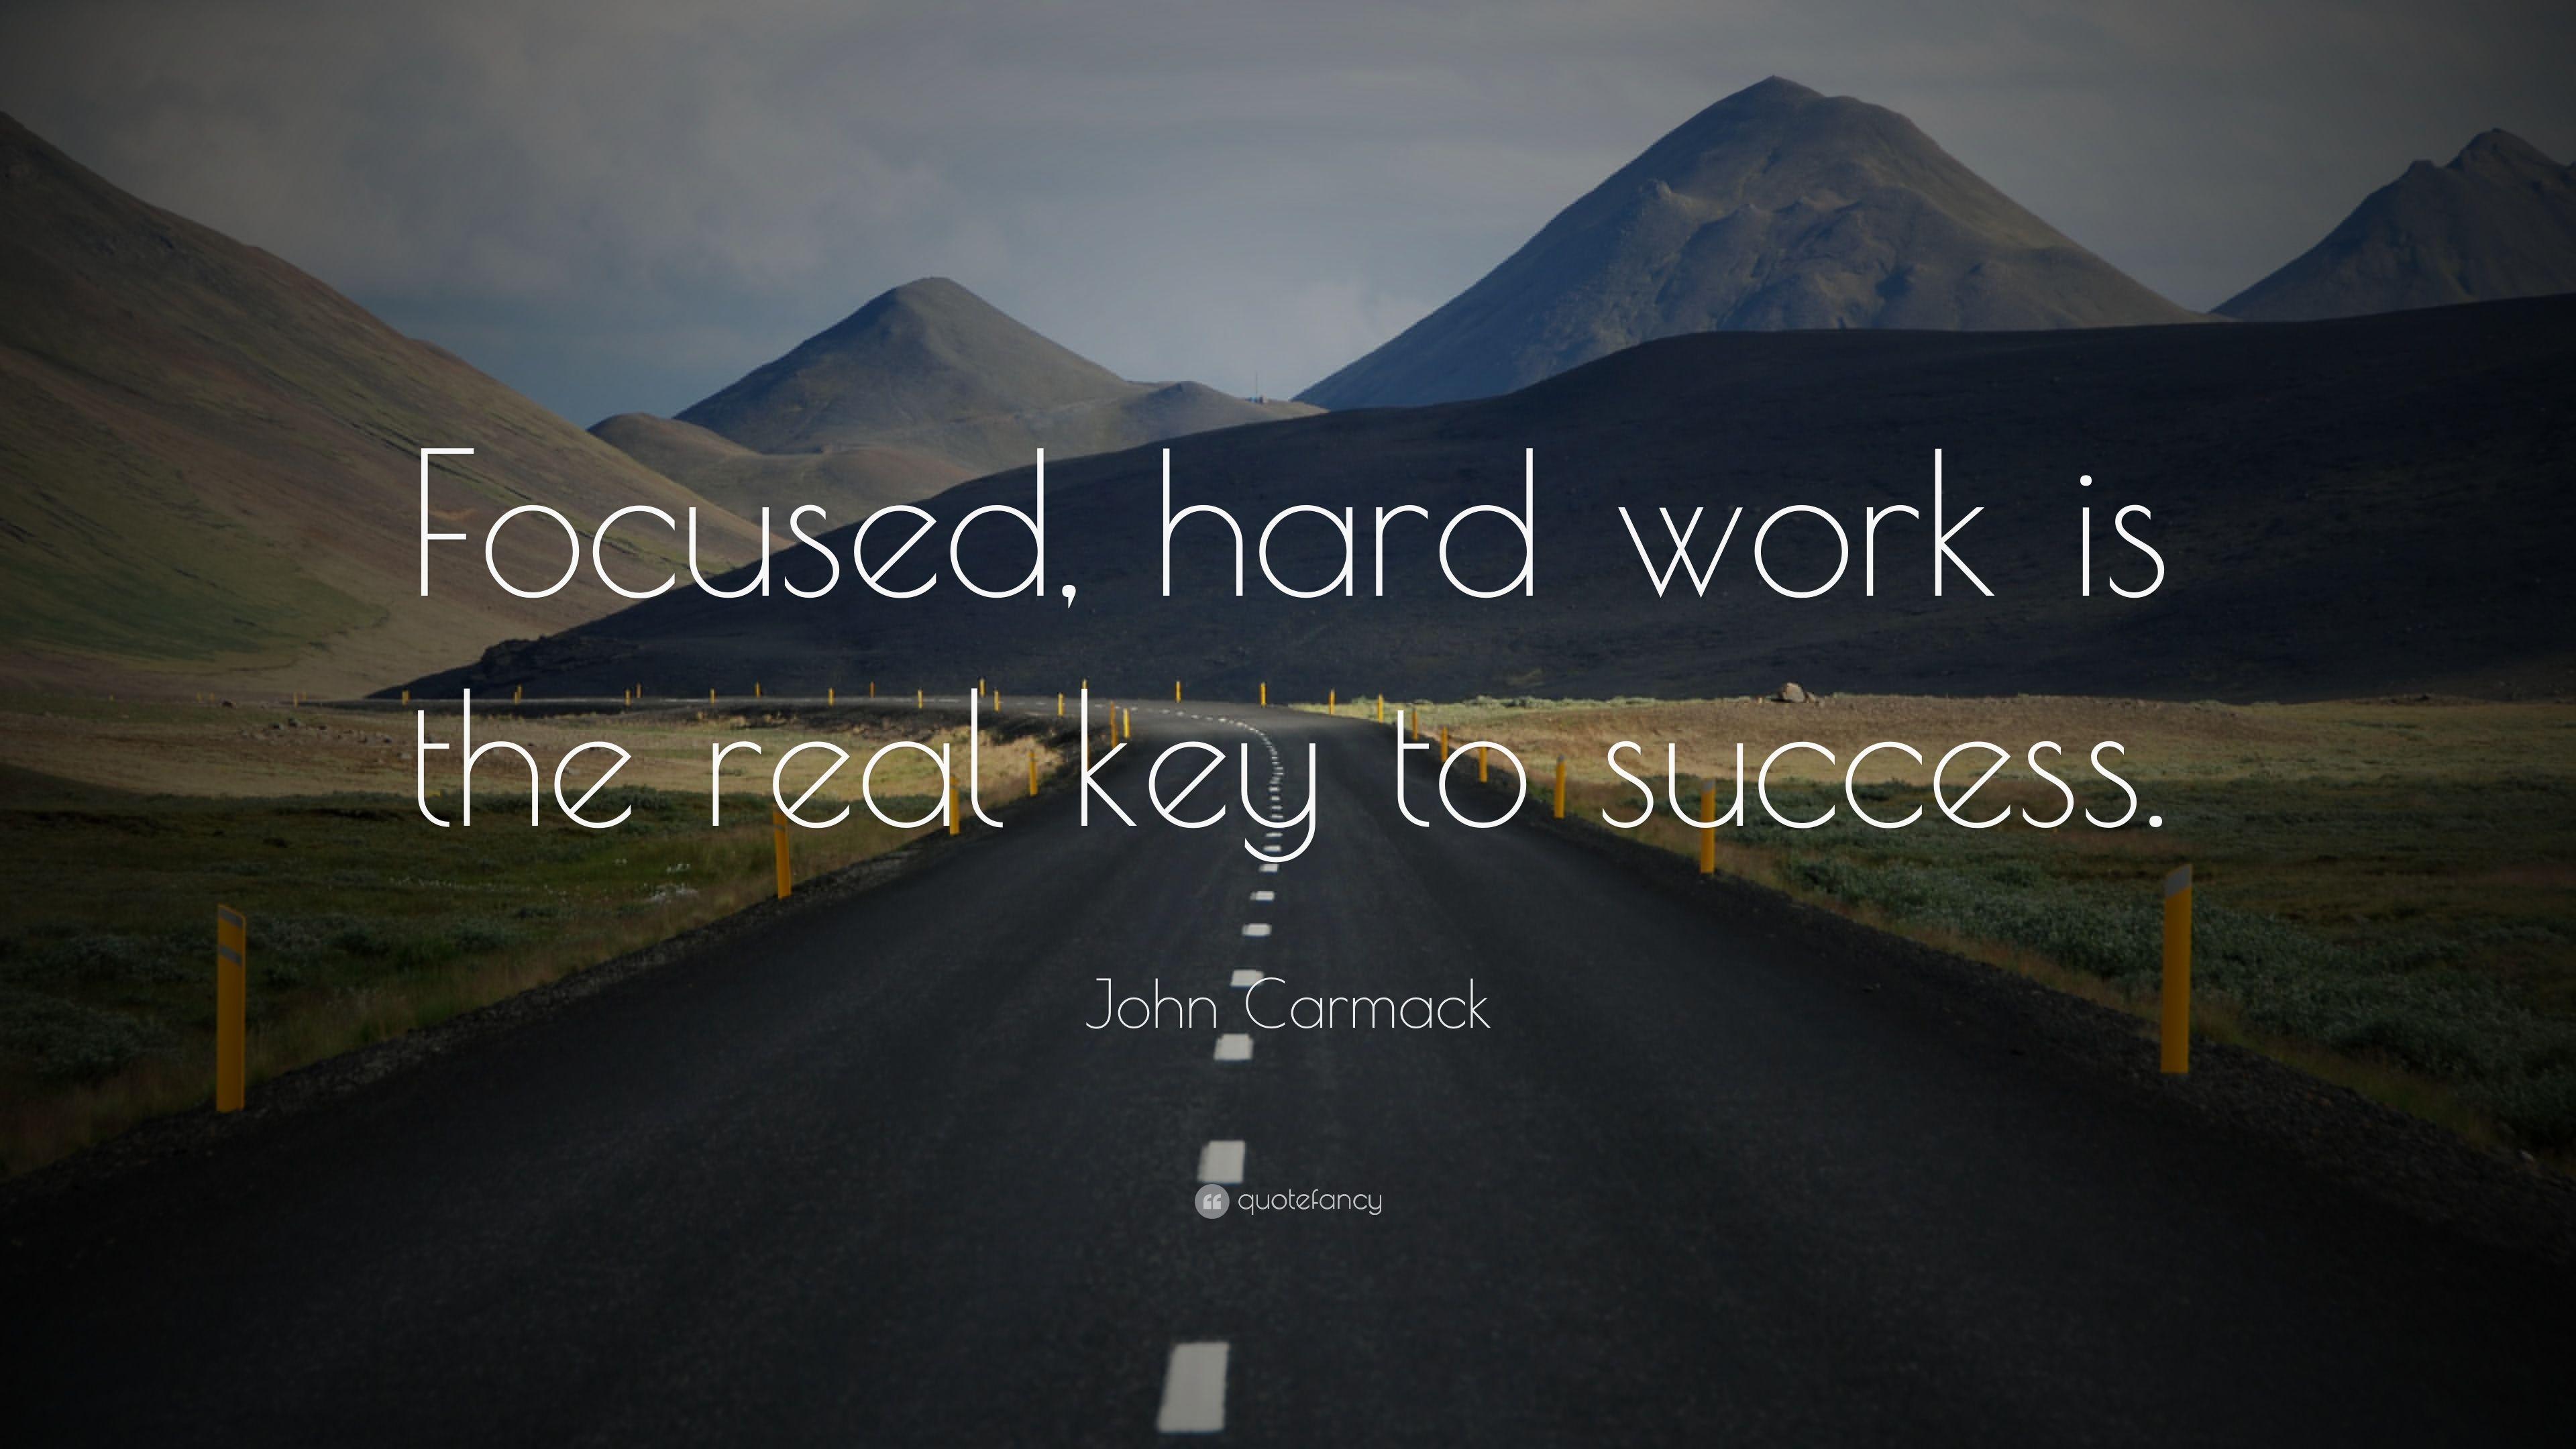 Hard work is the key to success wallpaper 1407687